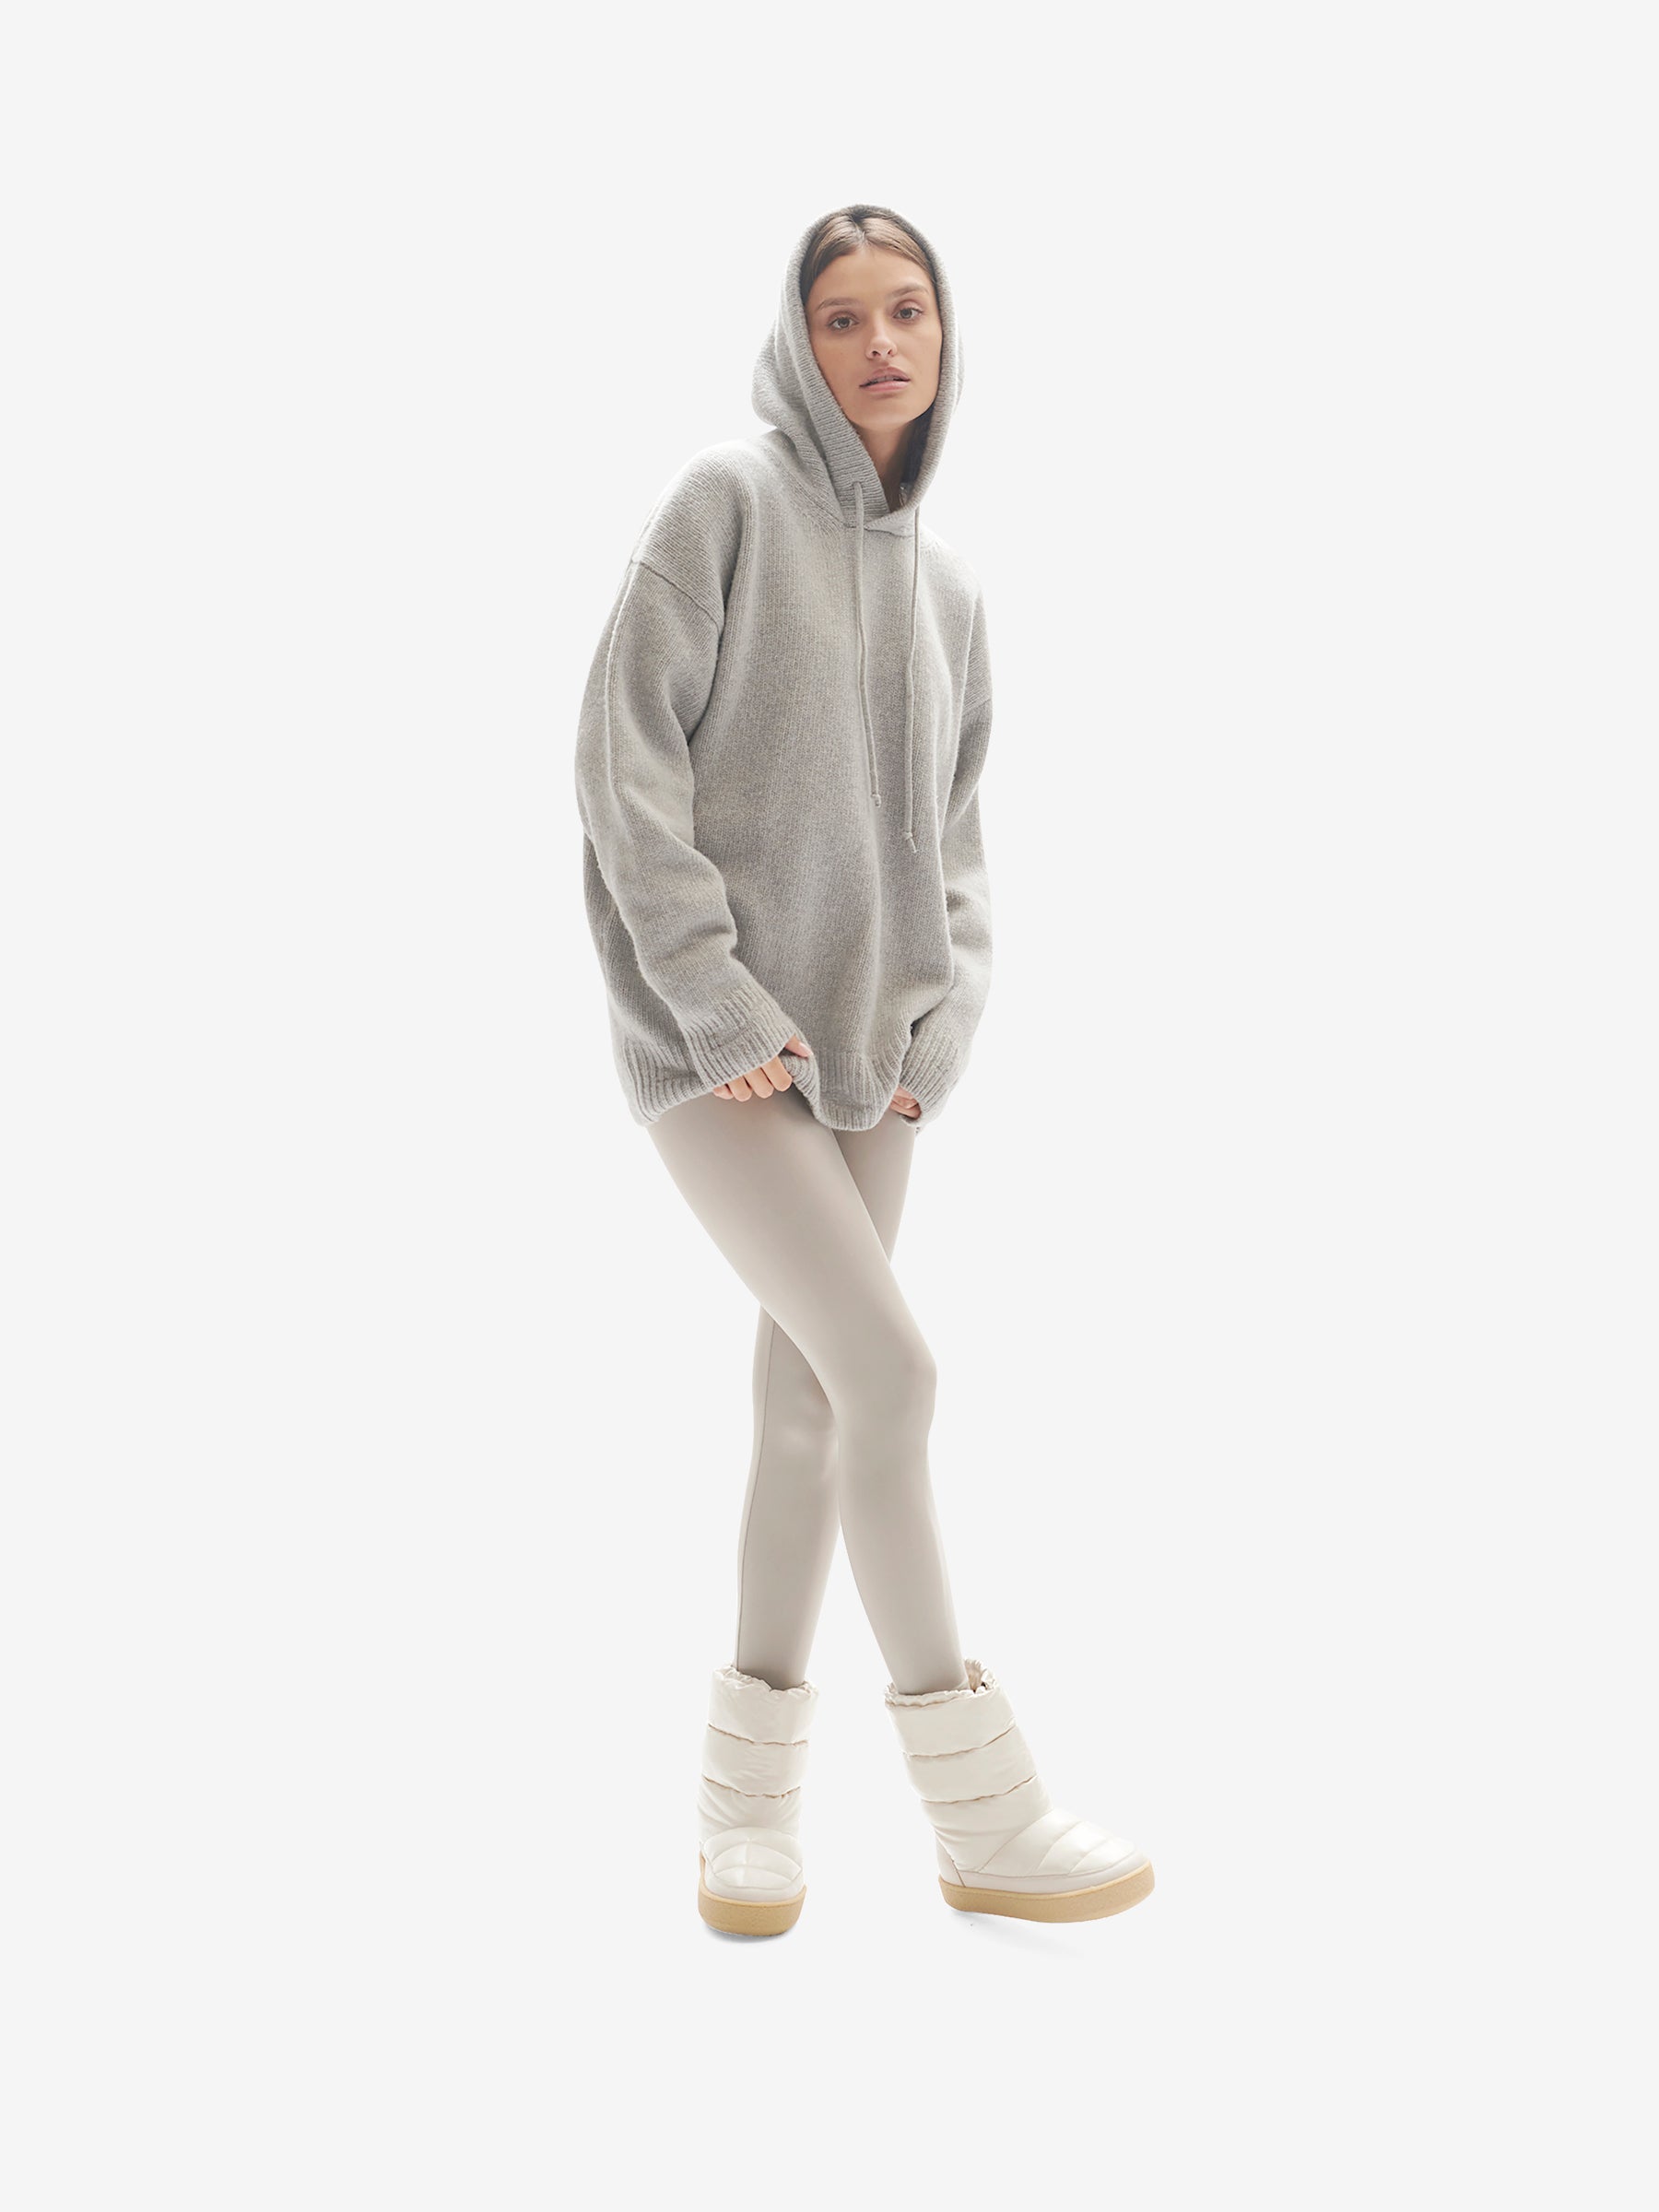 Woman WOOL KNIT HOODIE - Heather Gray - front